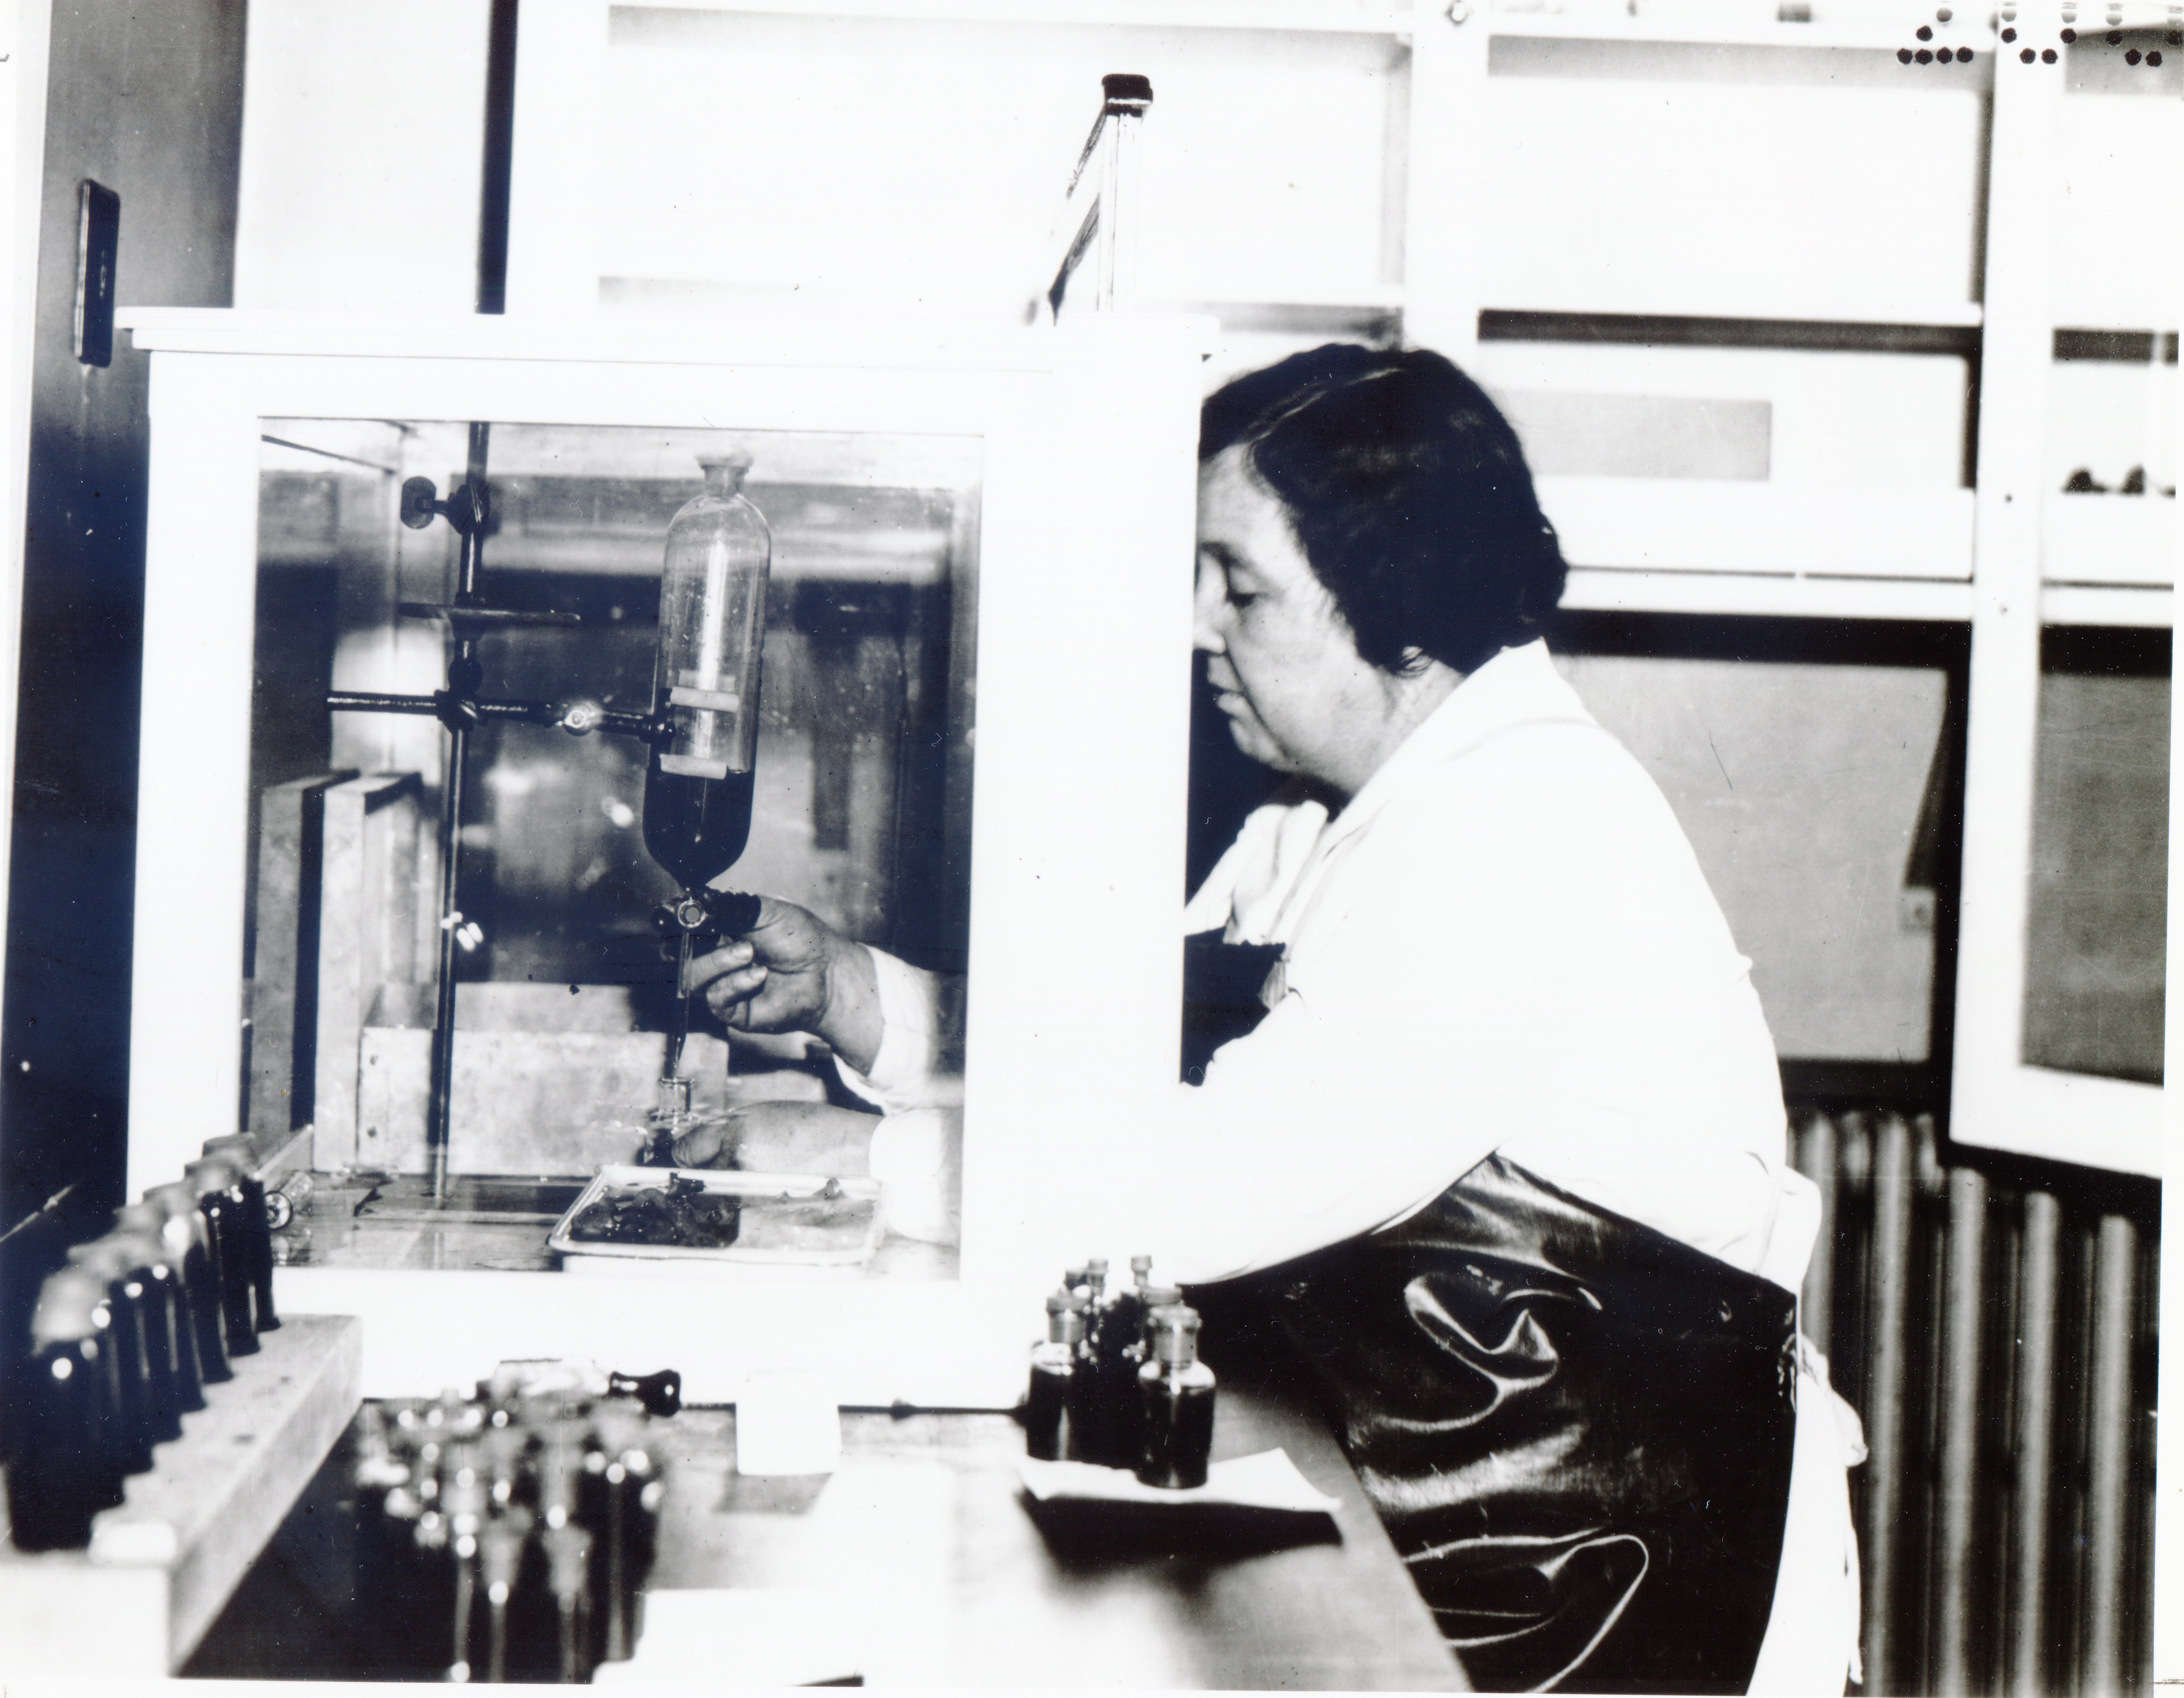 A woman bottles vaccine under a glass enclosure. She wears an apron but no protective gloves or mask.